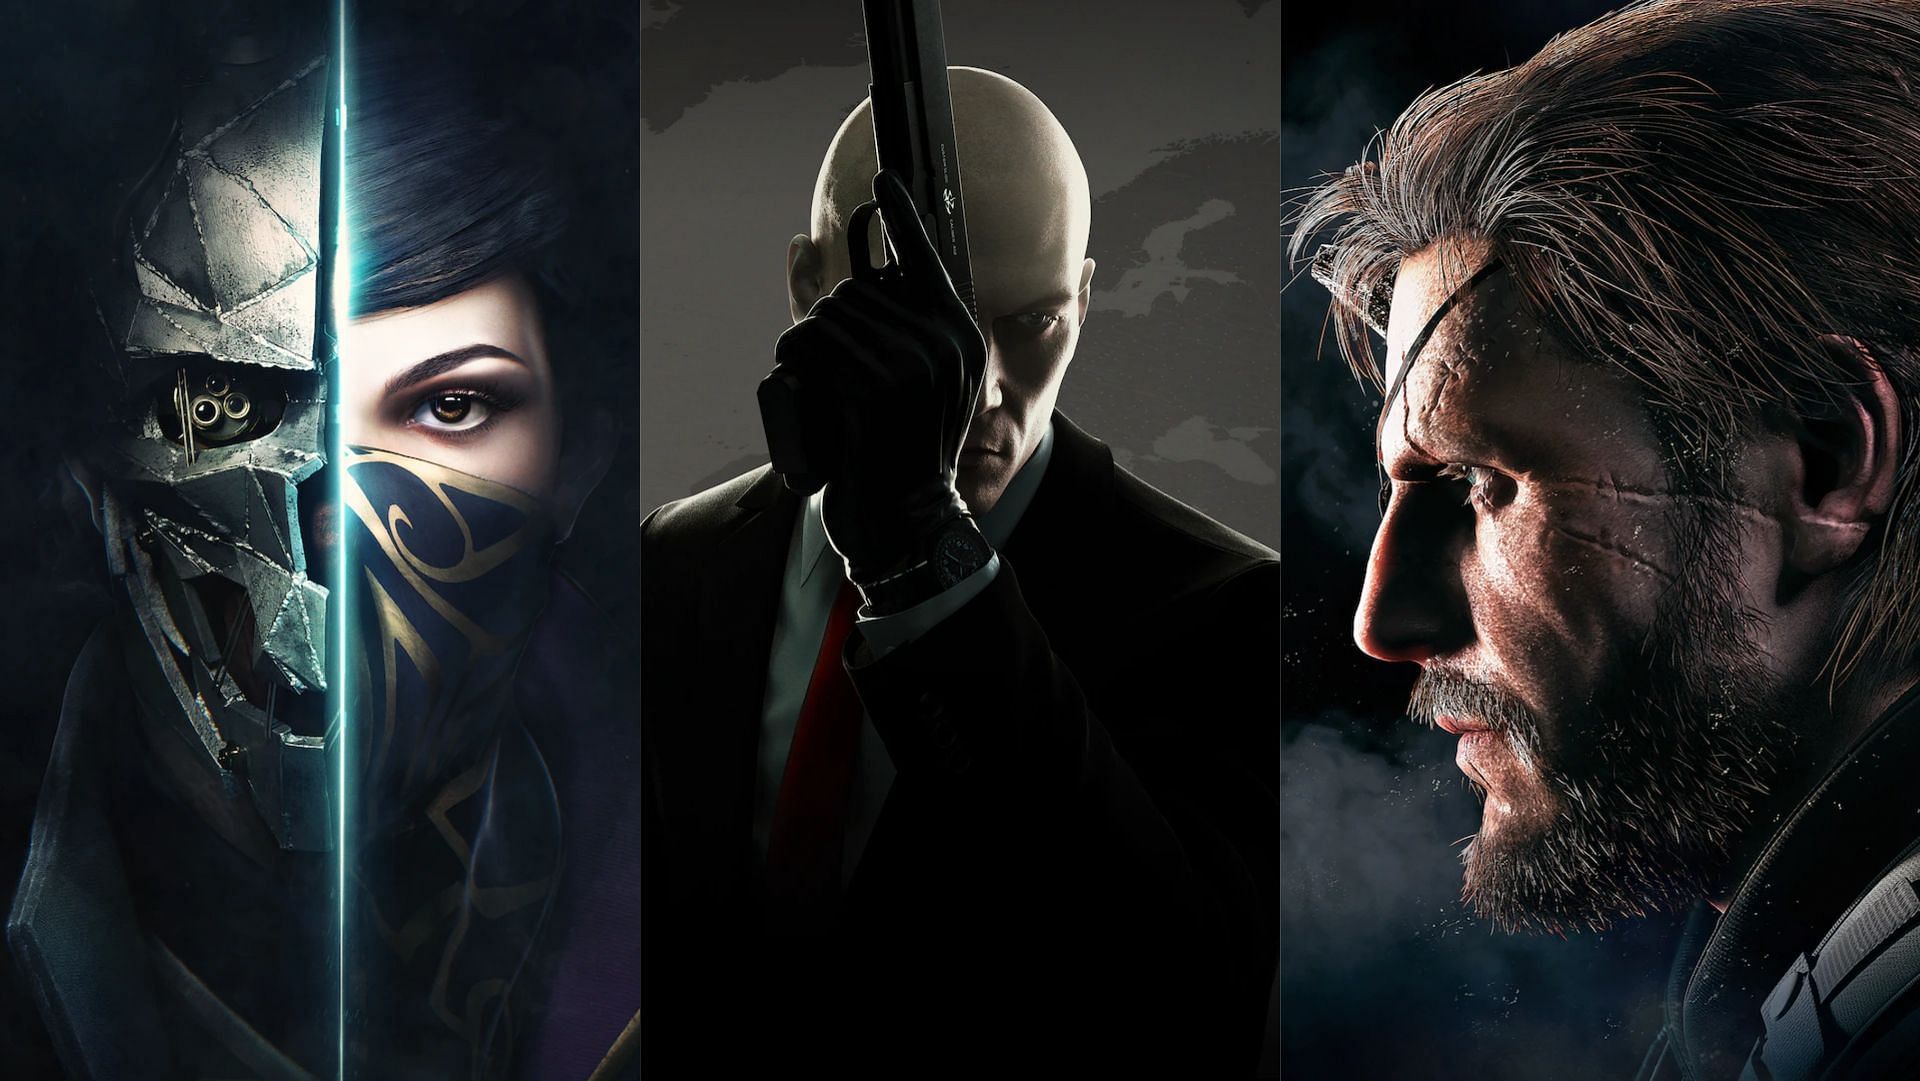 Much like the Hitman series, Dishonored 2 and Metal Gear Solid V: The Phantom Pain are some of the best stealth sandboxes out there (Image via Bethesda Softworks, IO Interactive, Konami)